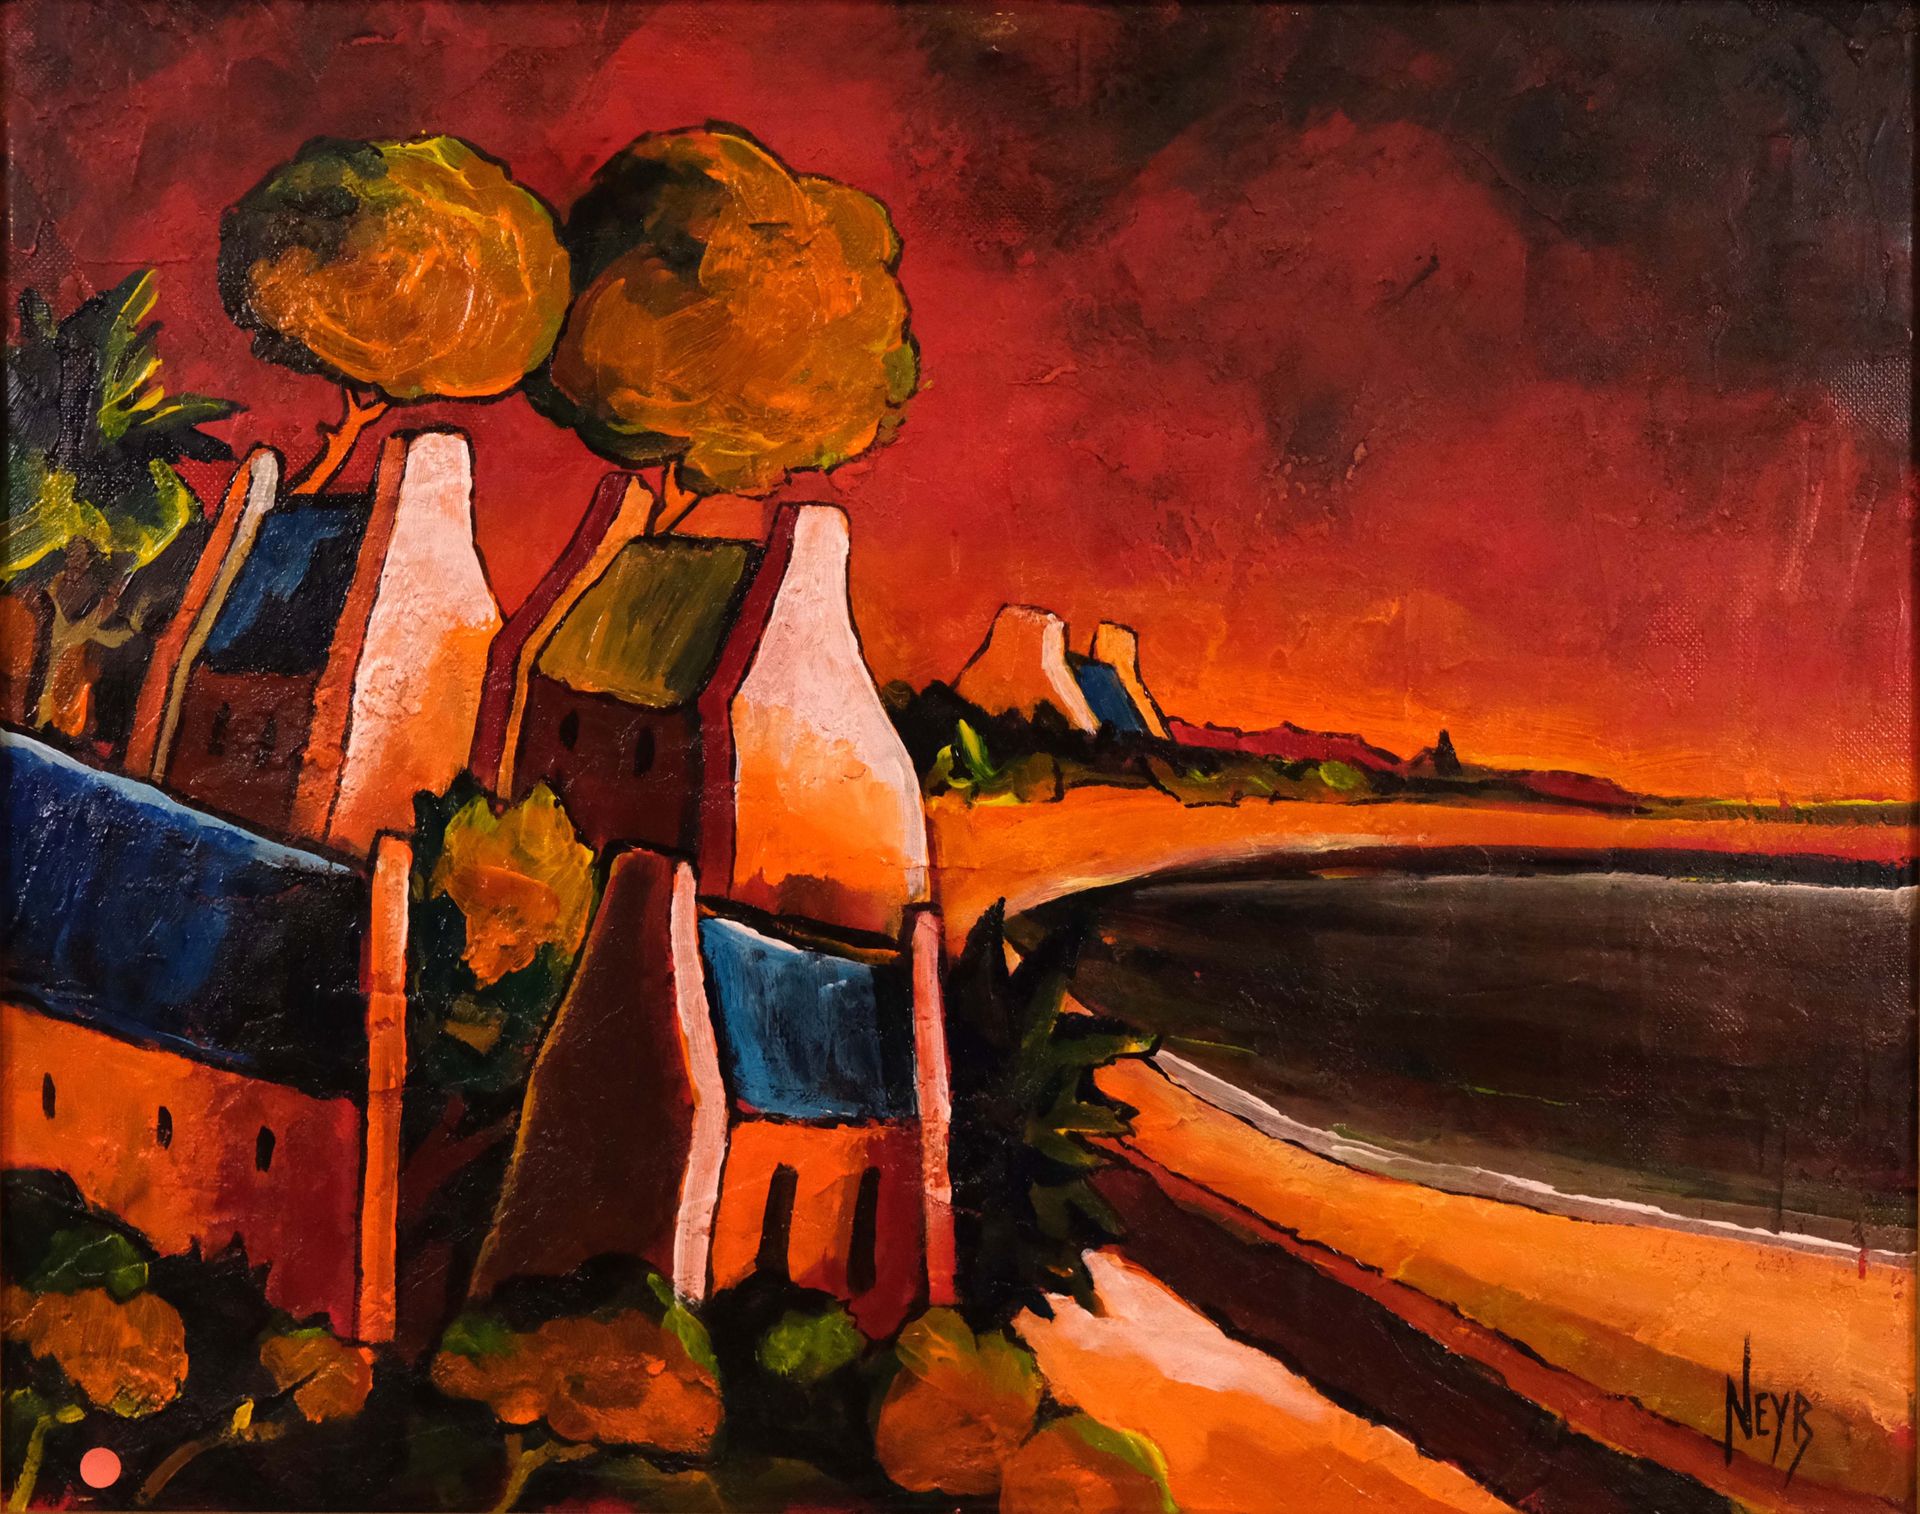 Null Gérard NEYB (1948) "Kercaty" oil on canvas signed lower right 33 x 41 cm